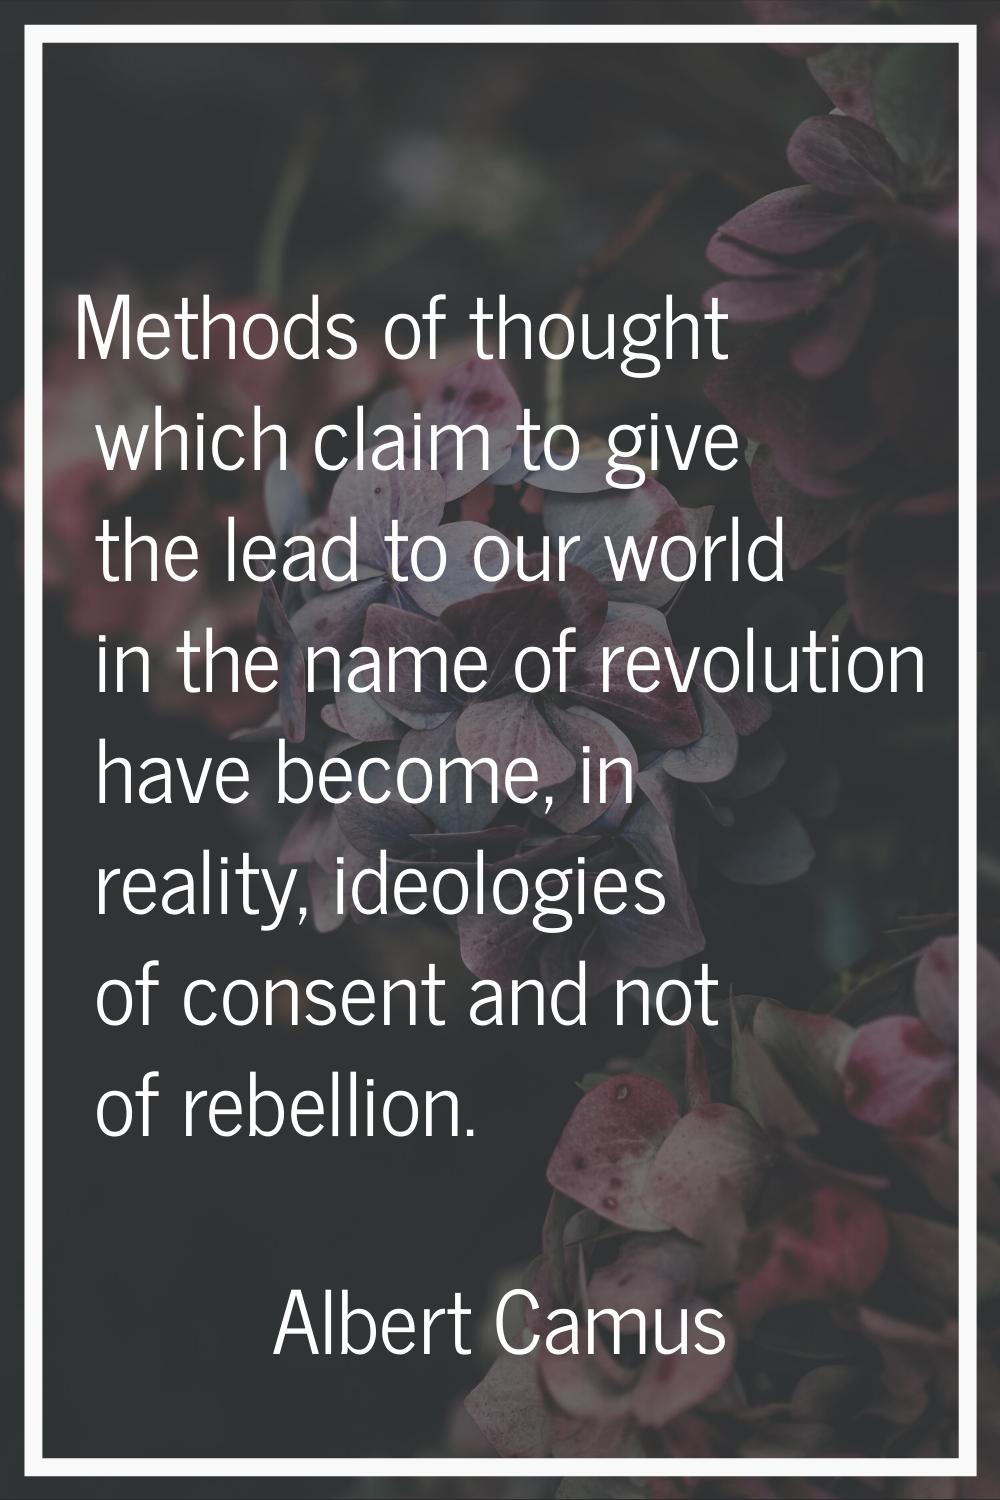 Methods of thought which claim to give the lead to our world in the name of revolution have become,